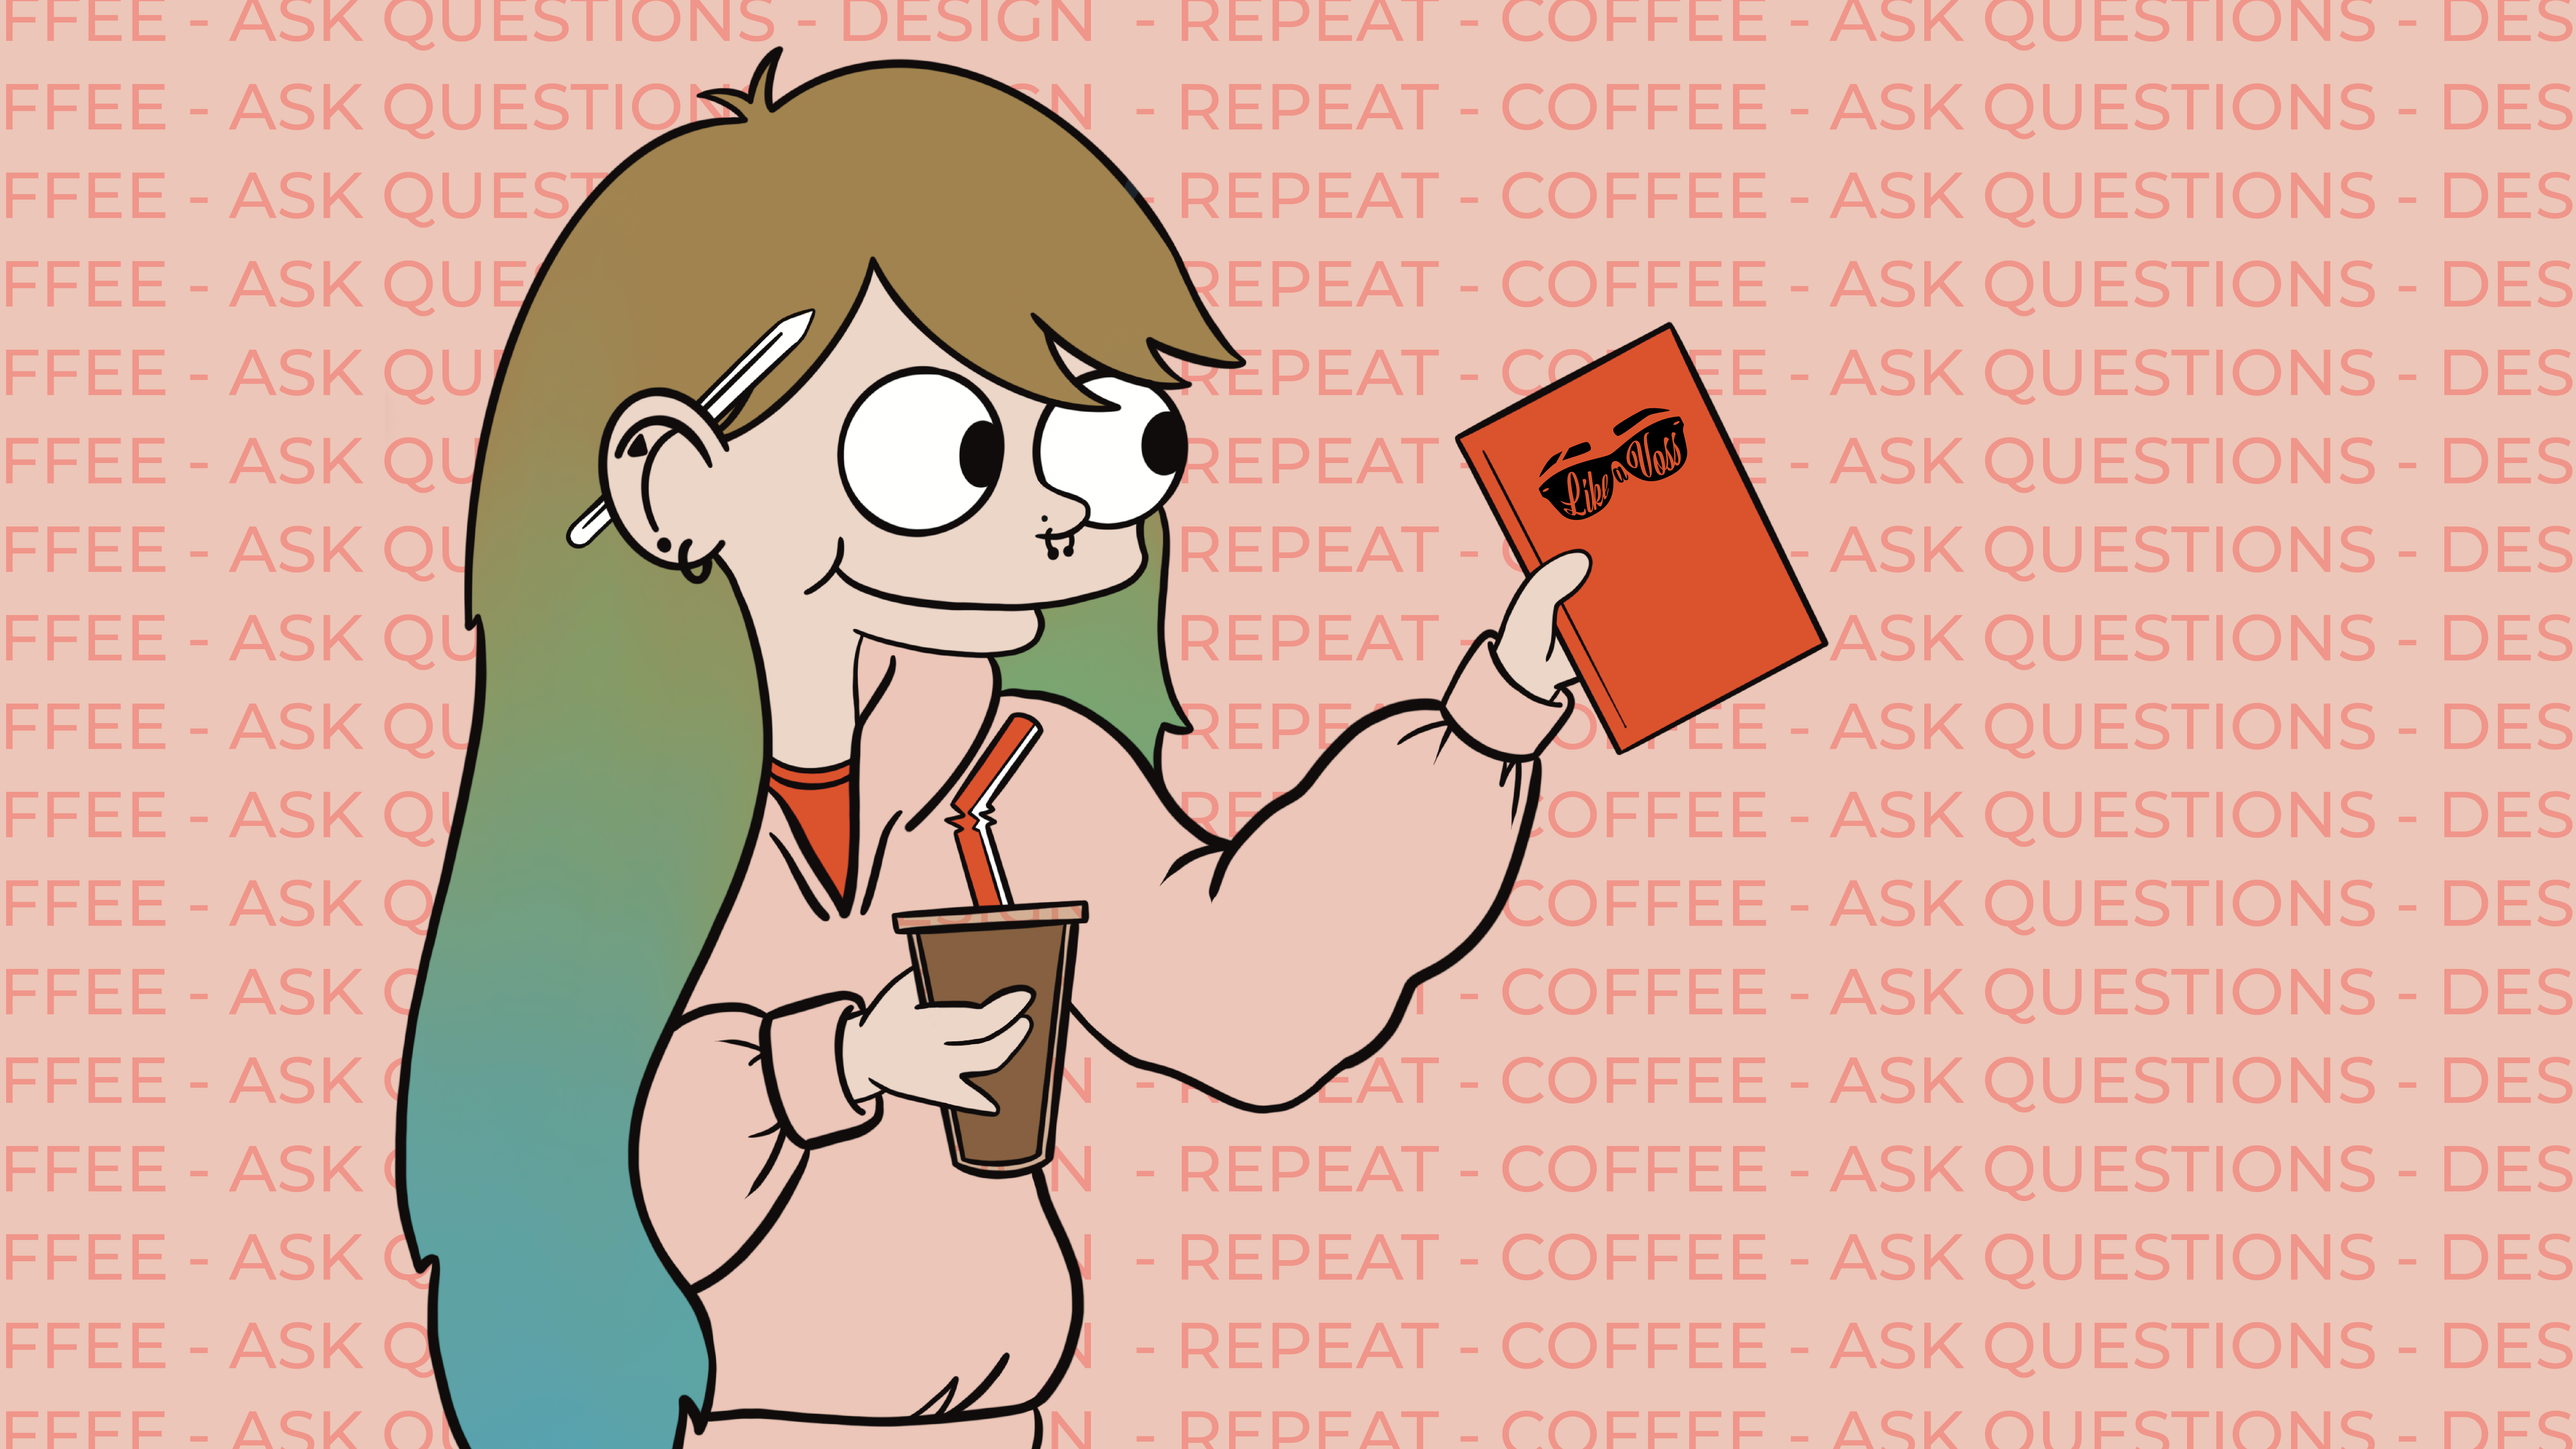 Coffee, Ask Question, Design, Repeat